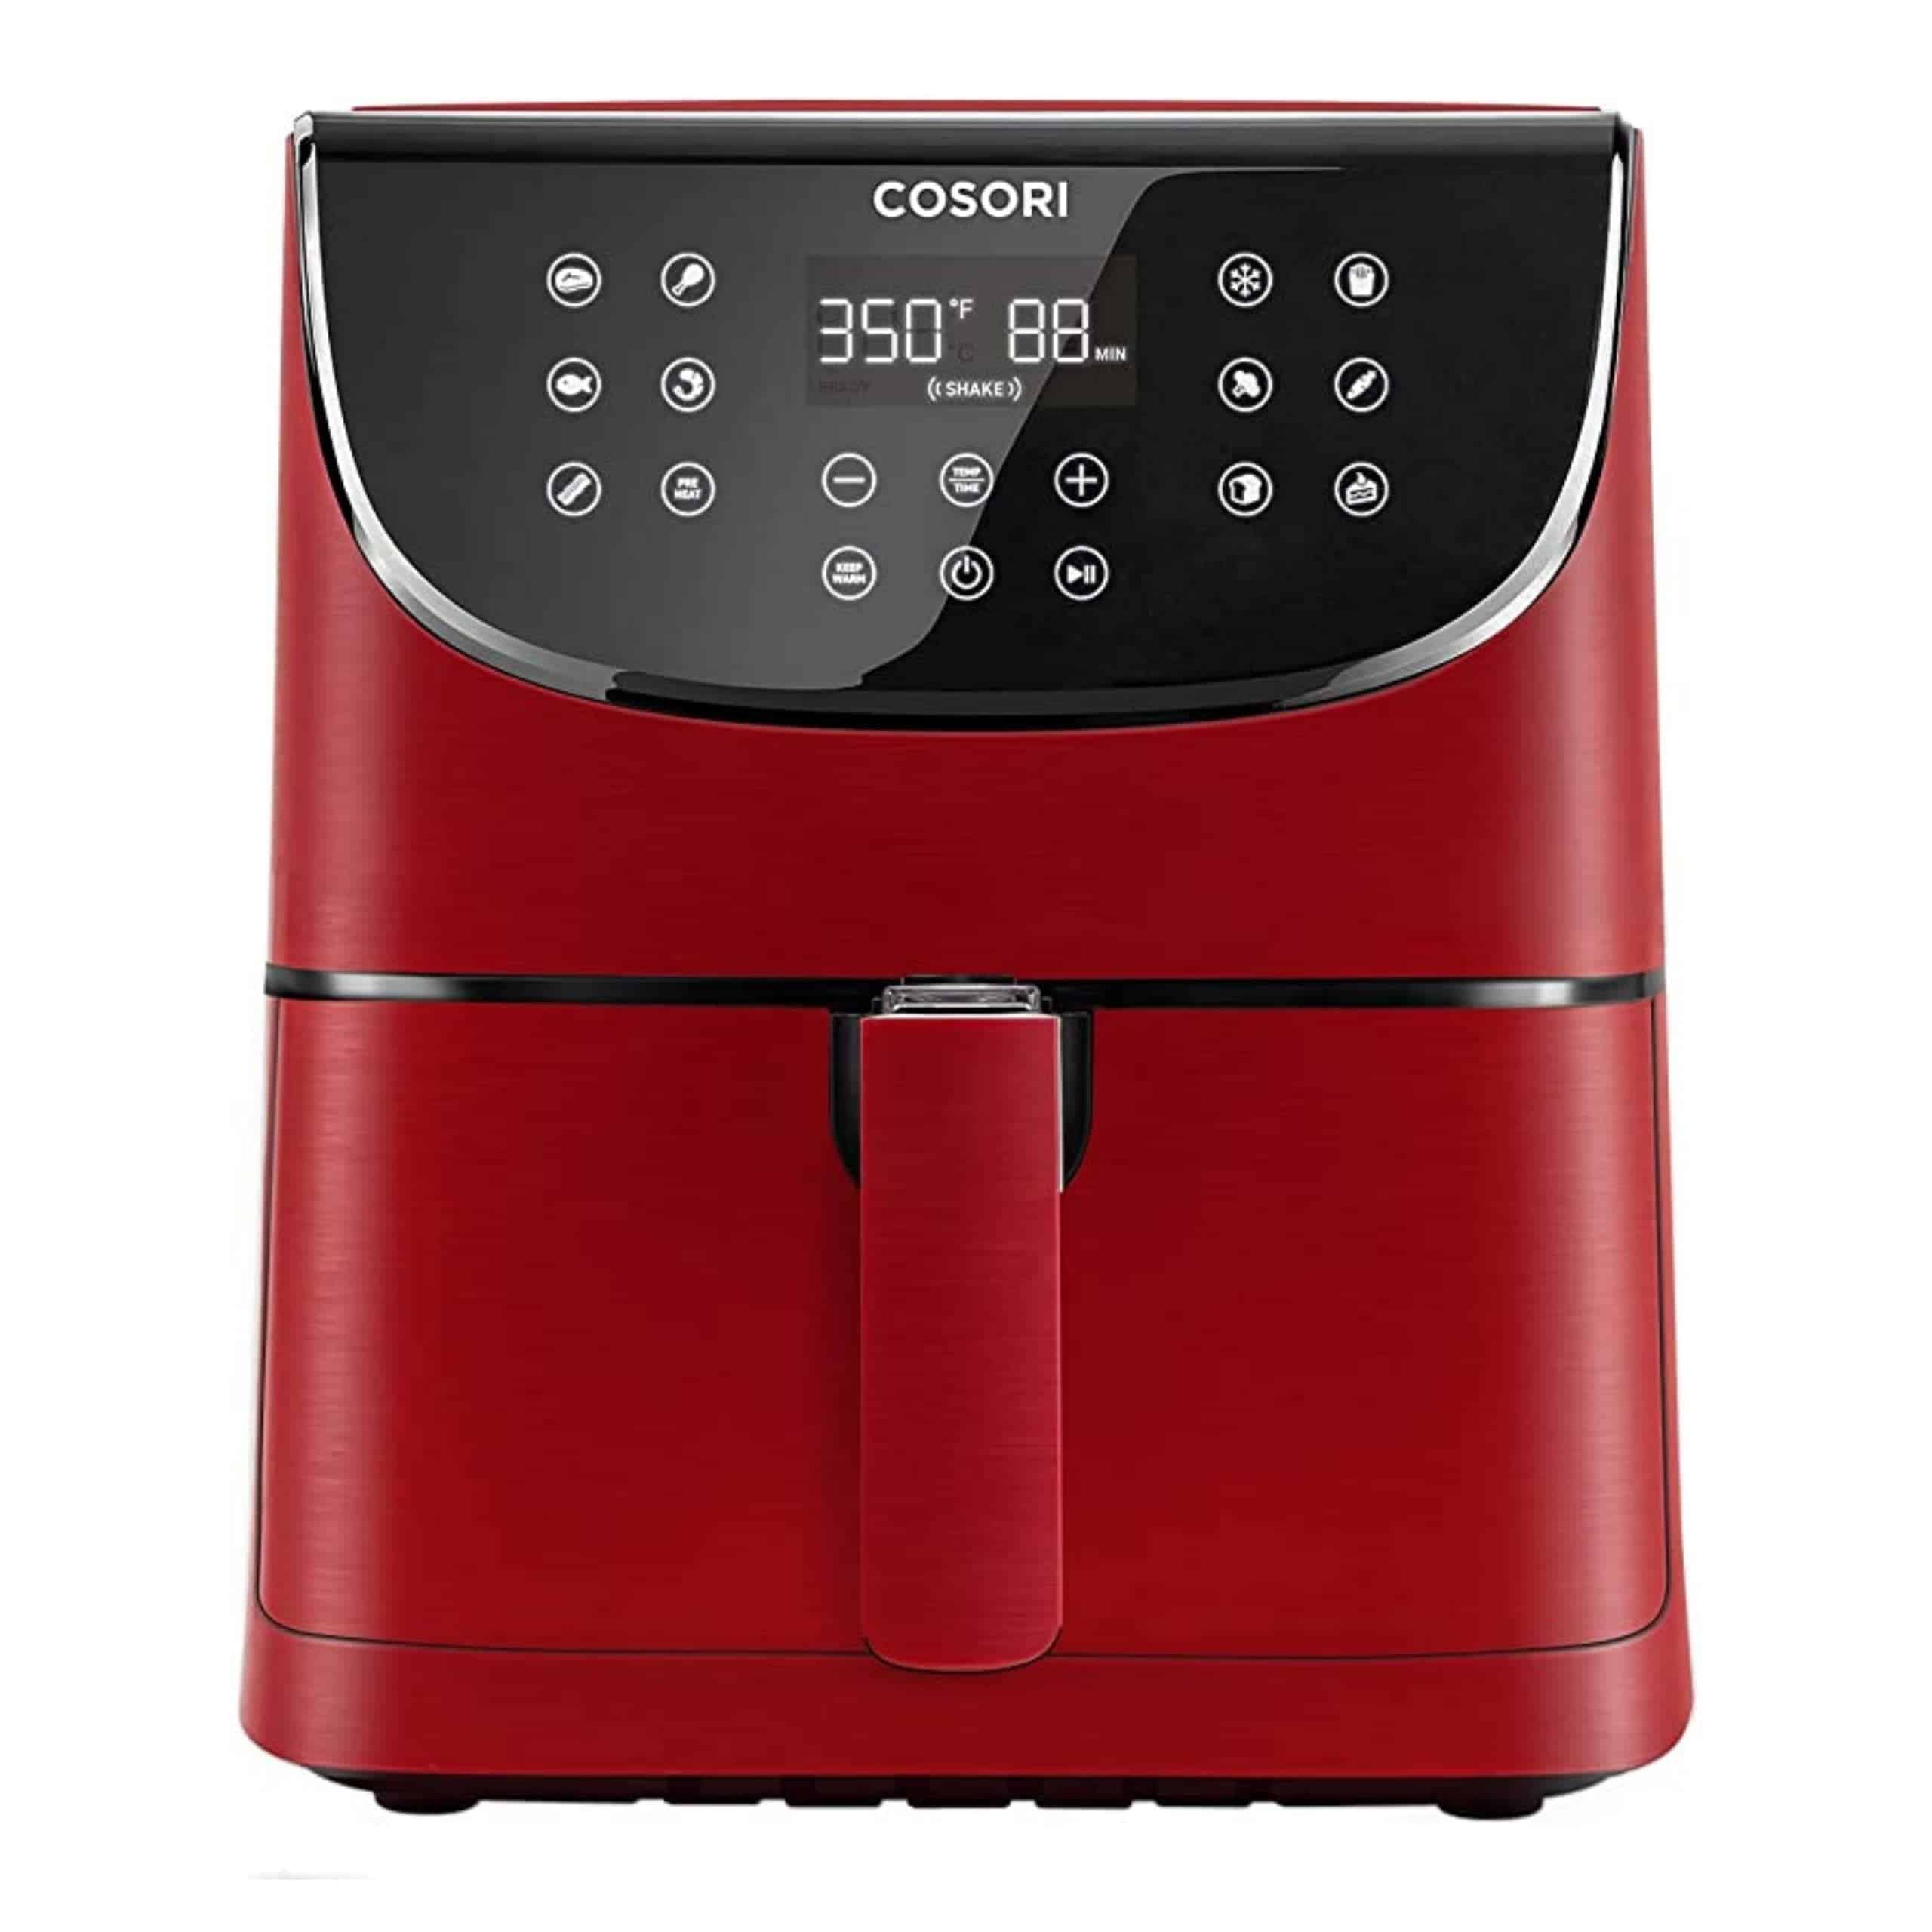 Cosori pro ii most wished air fryer 2022